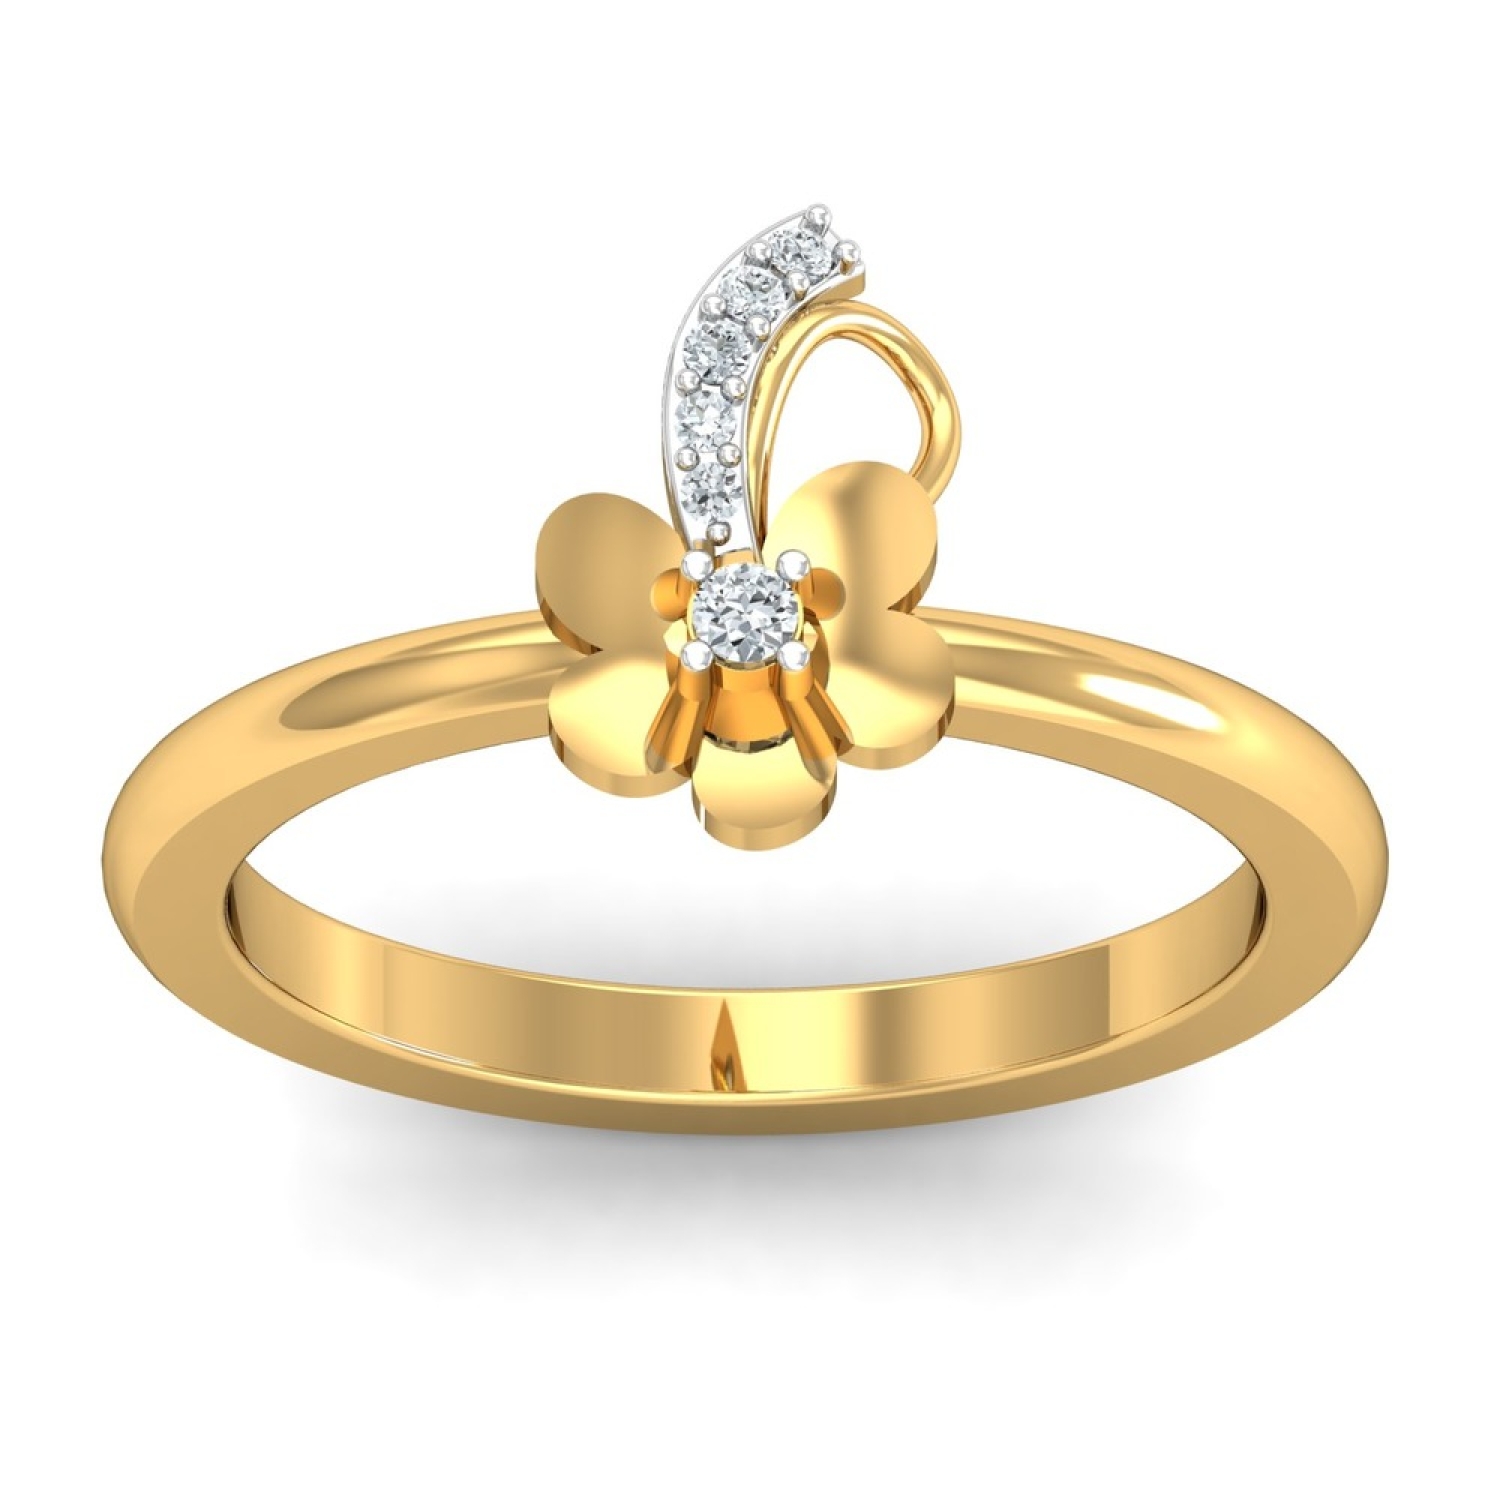 Buy Diamond Rings for Women Designs Online in India | Candere by Kalyan  Jewellers